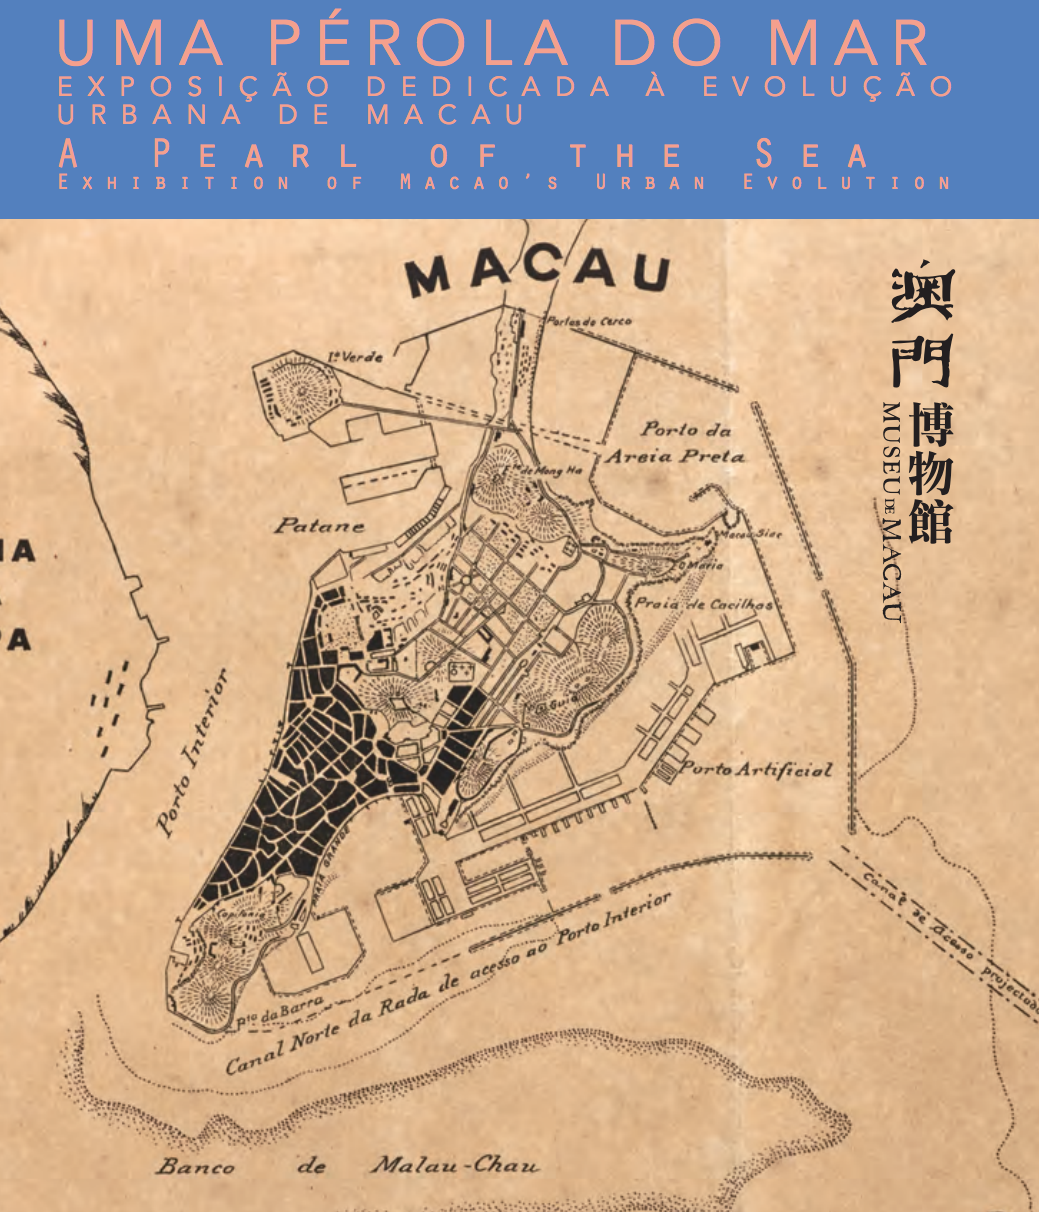 A Pearl of the Sea — Exhibition of Macaos Urban Evolution january events macau